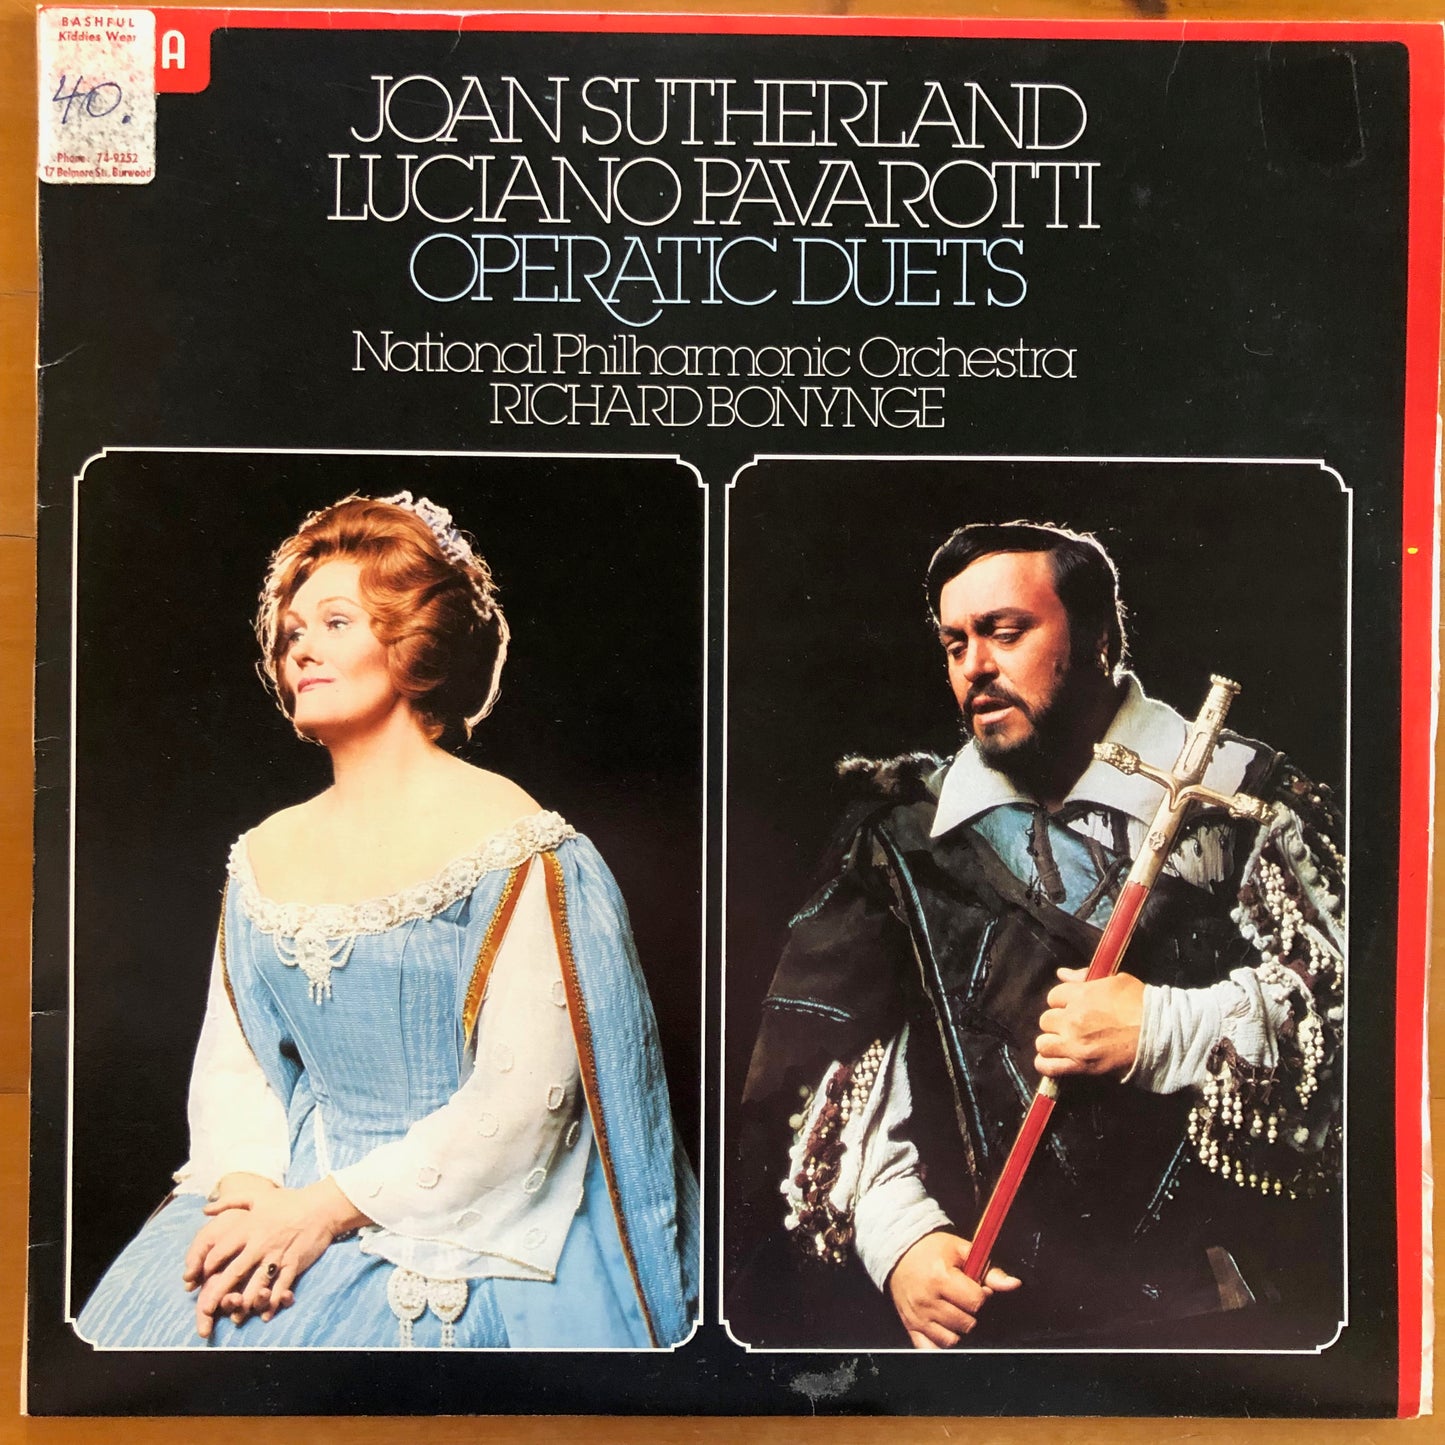 Joan Sutherland and Luciano Pavarotti - Operatic Duets